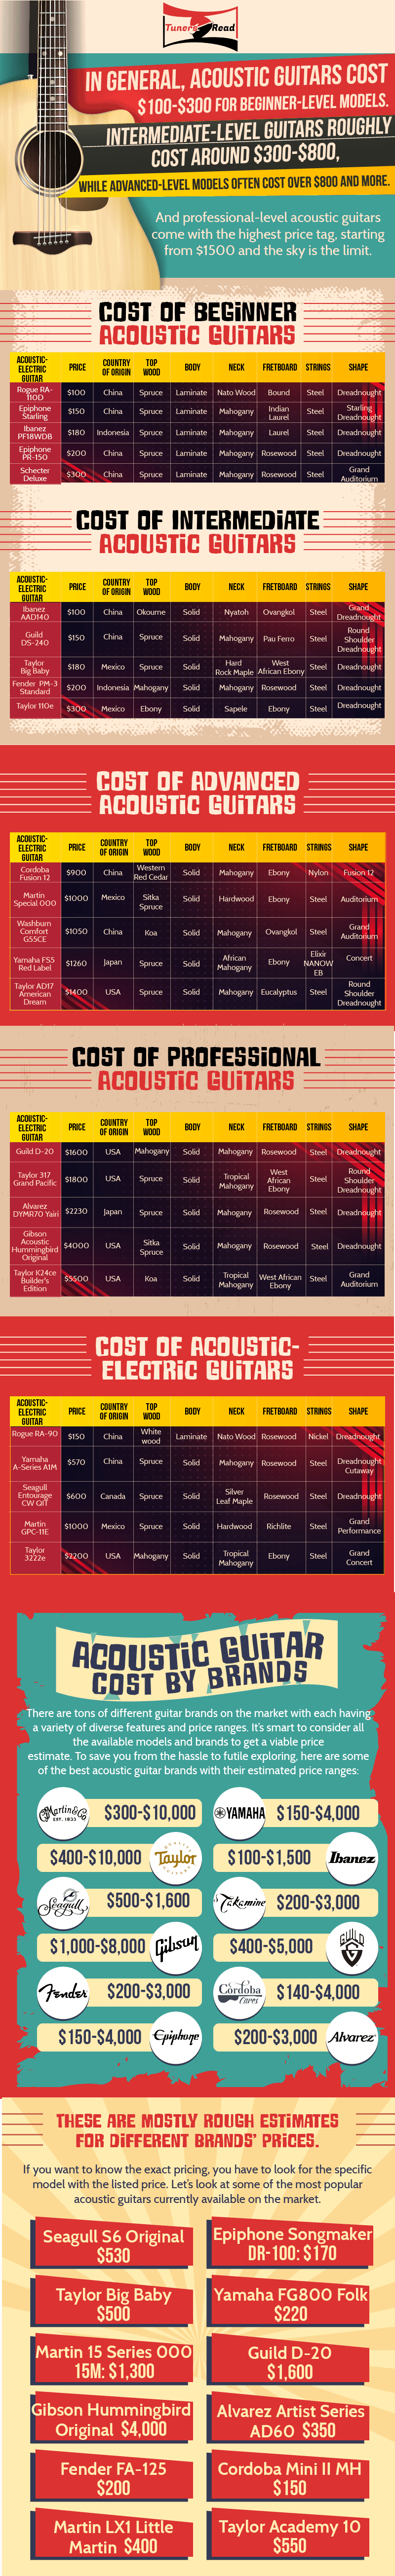 acoustic guitar cost infographic